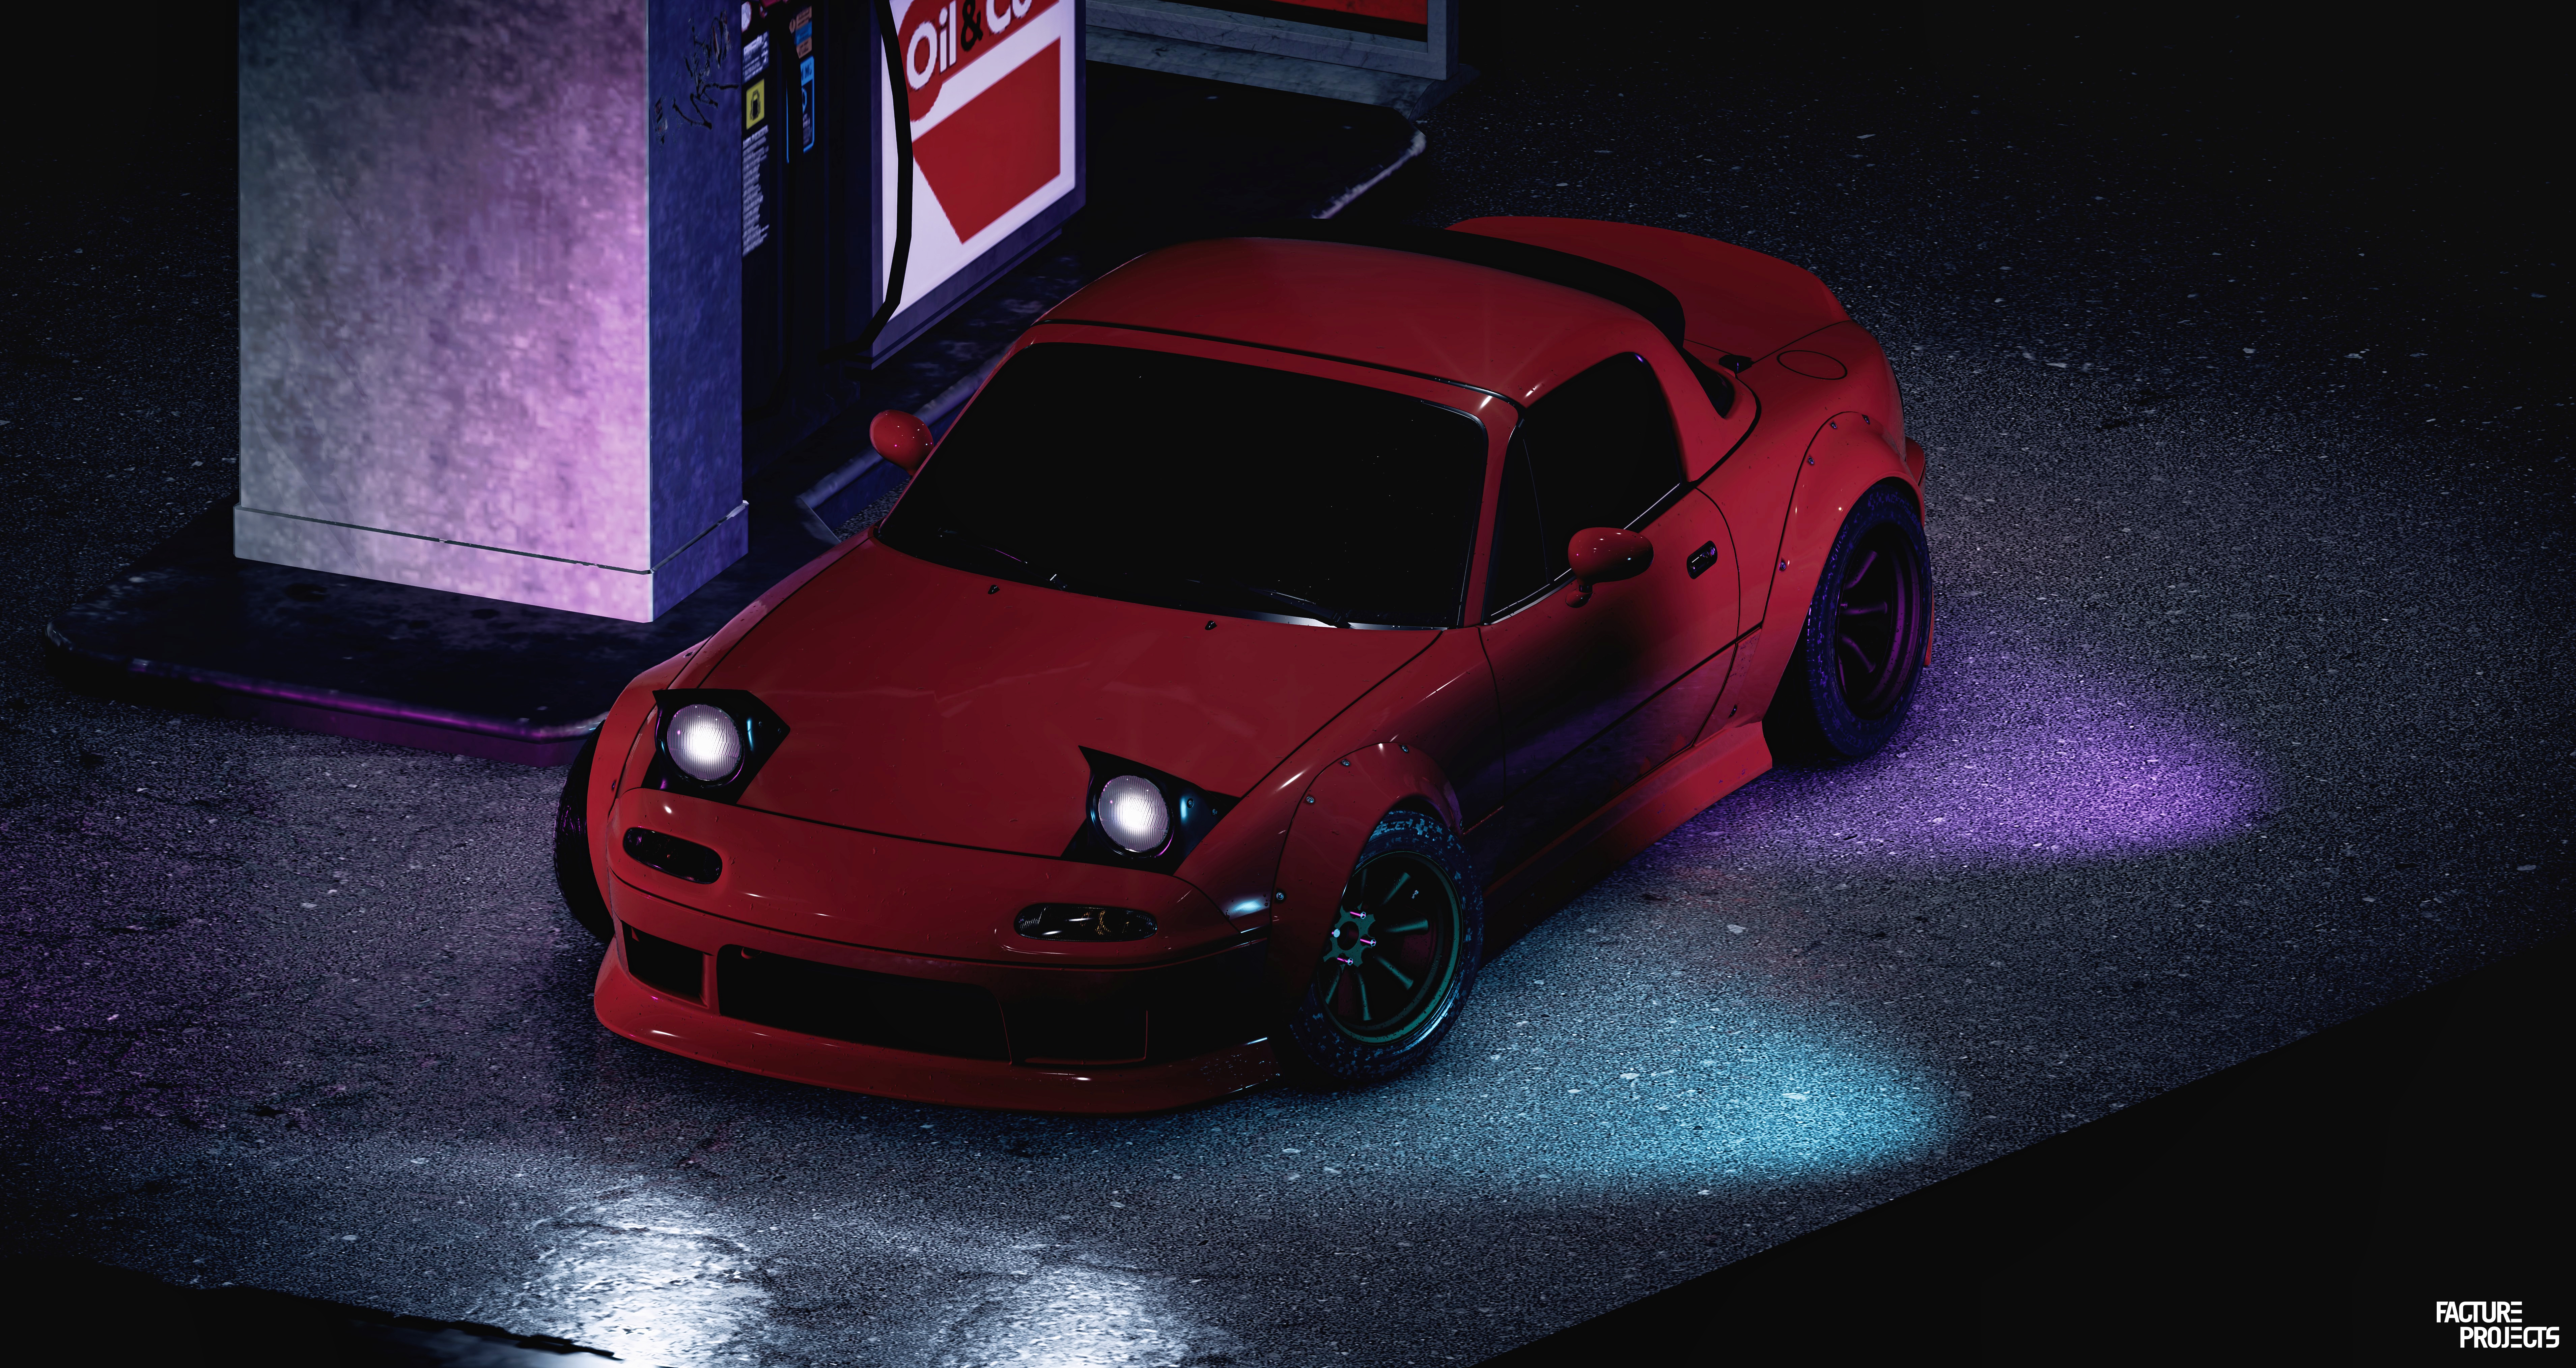 Mazda MX 5 Mazda Red Red Cars NFS 2015 Need For Speed 7636x4056